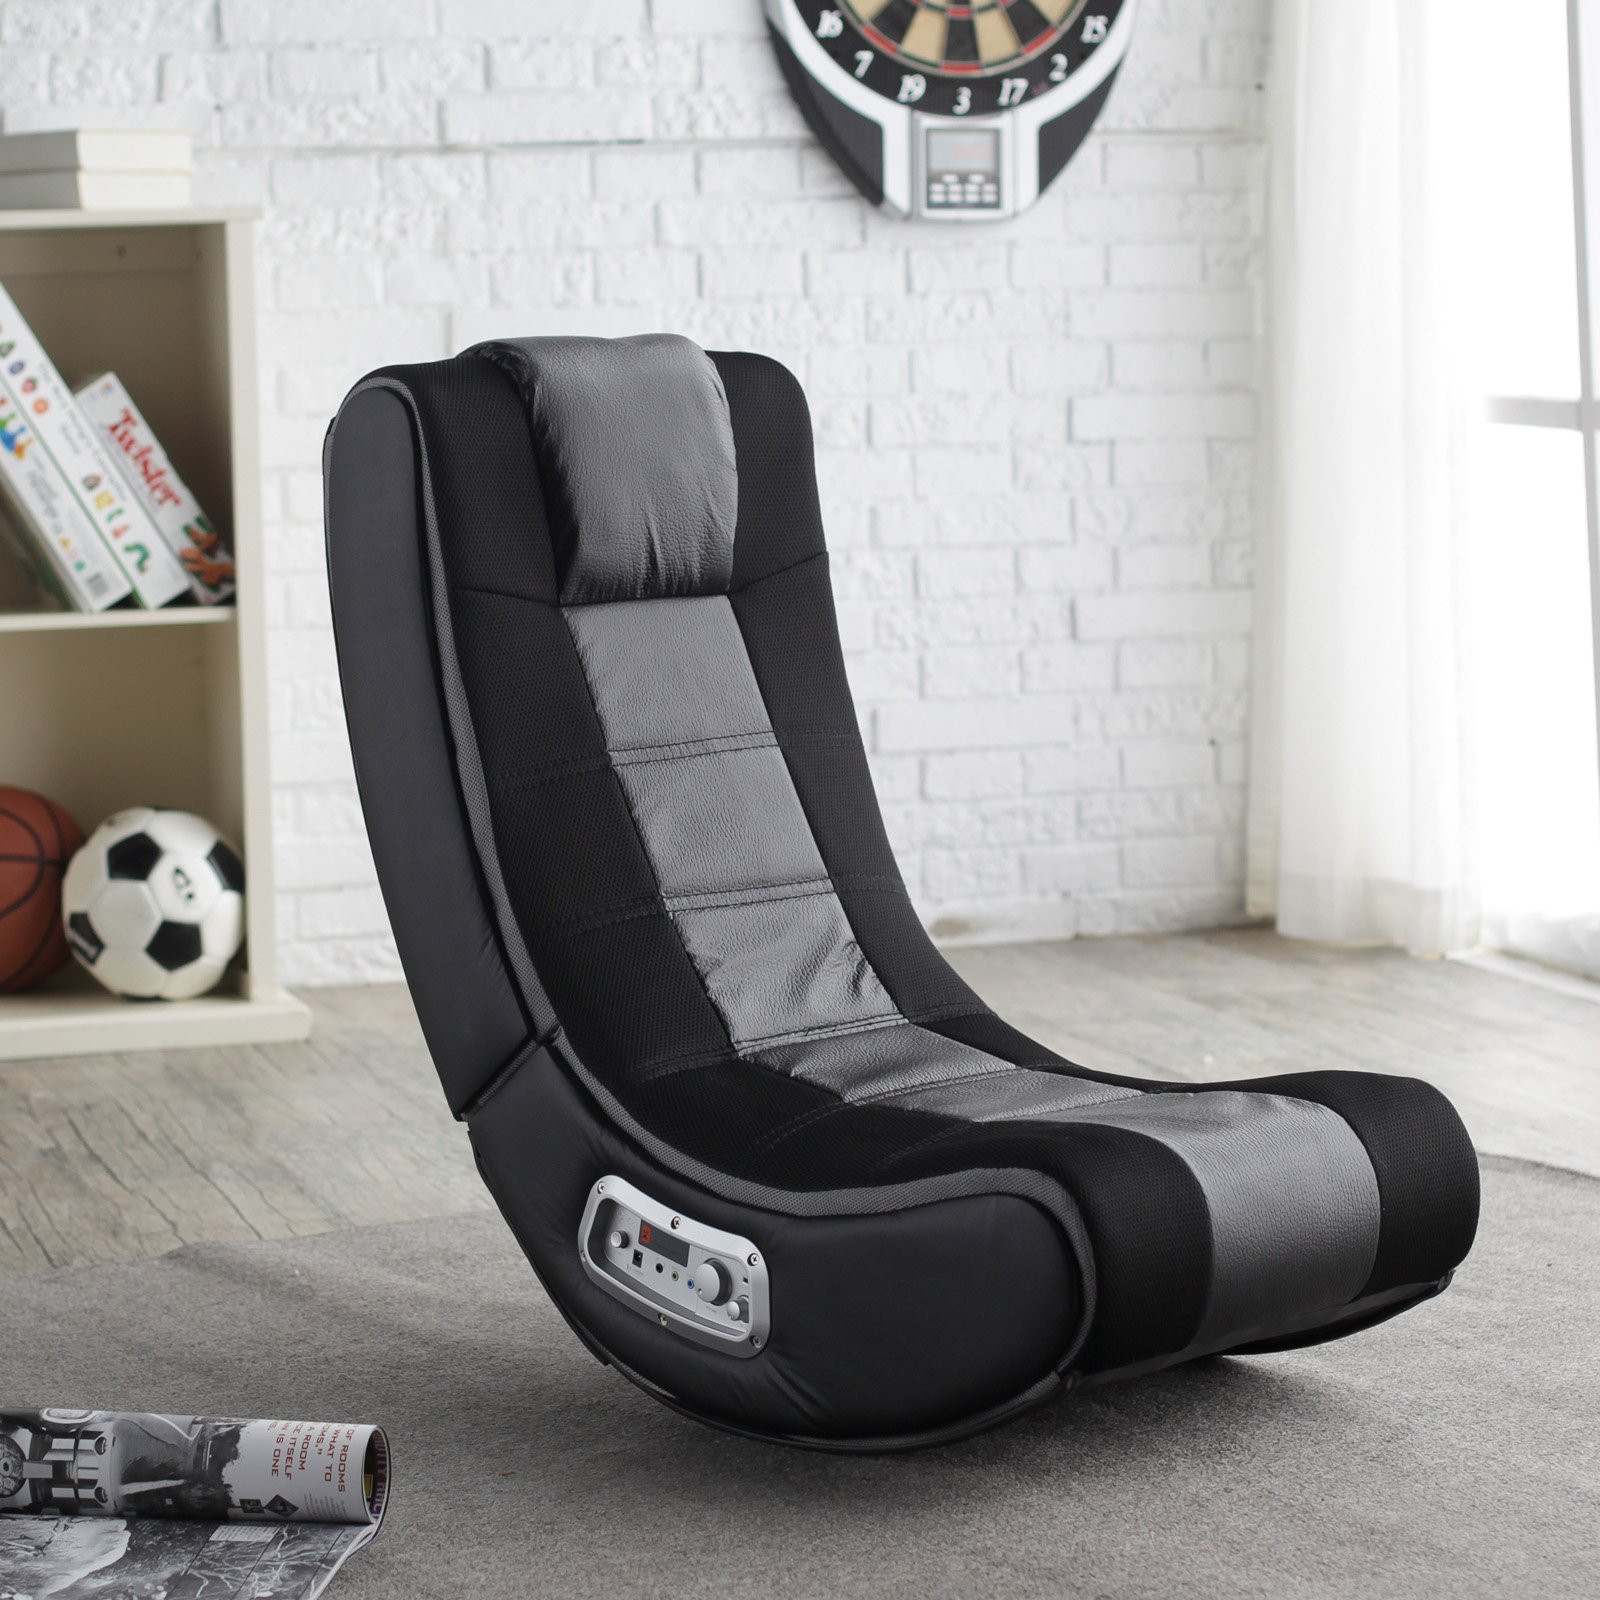 Game Chair For Kids
 X Rocker SE Wireless Black Game Chair Video Game